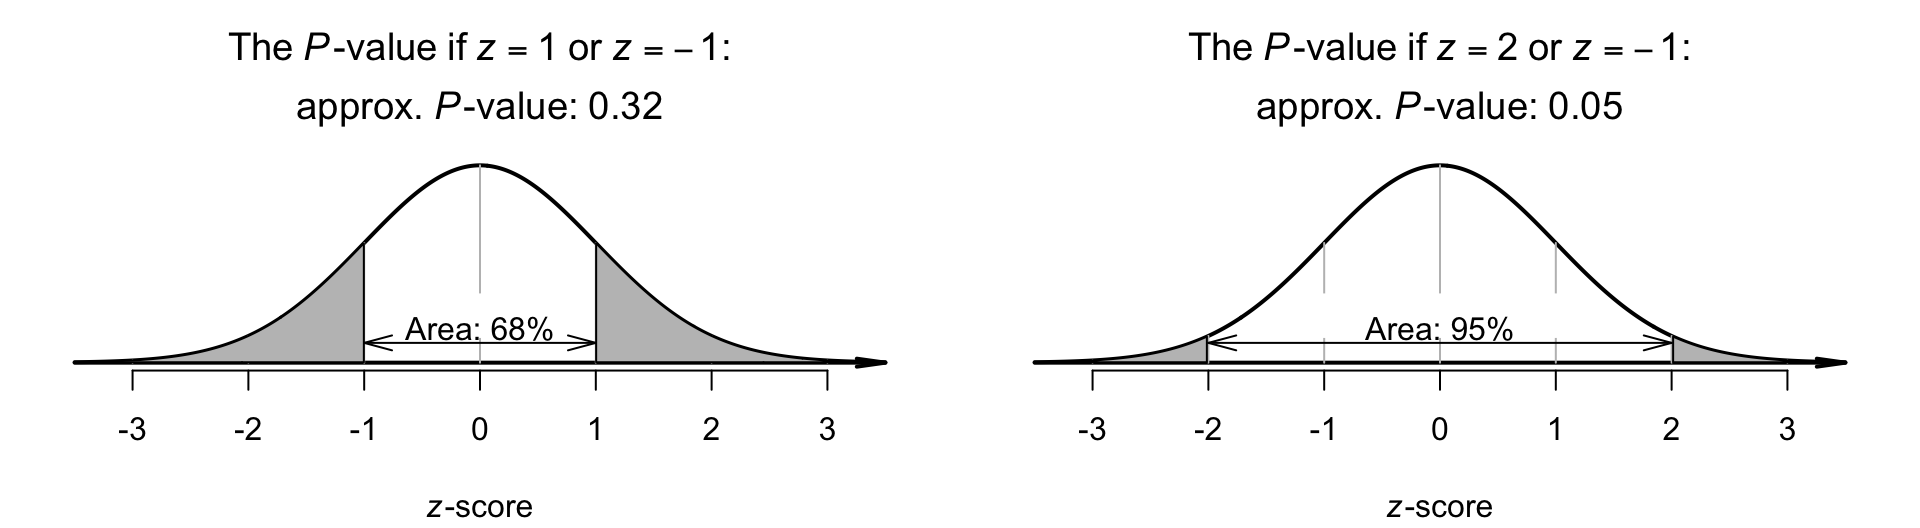 The two-tailed P-value is the combined area in the two tails of the distribution; left panel: if $z = 1$ (or $z = -1$); right panel: if $z = 2$ (or $z = -2$). (The one-tailed $P$-values are half the two-tailed $P$-values: $P = 0.16$ and $P = 0.025$.)